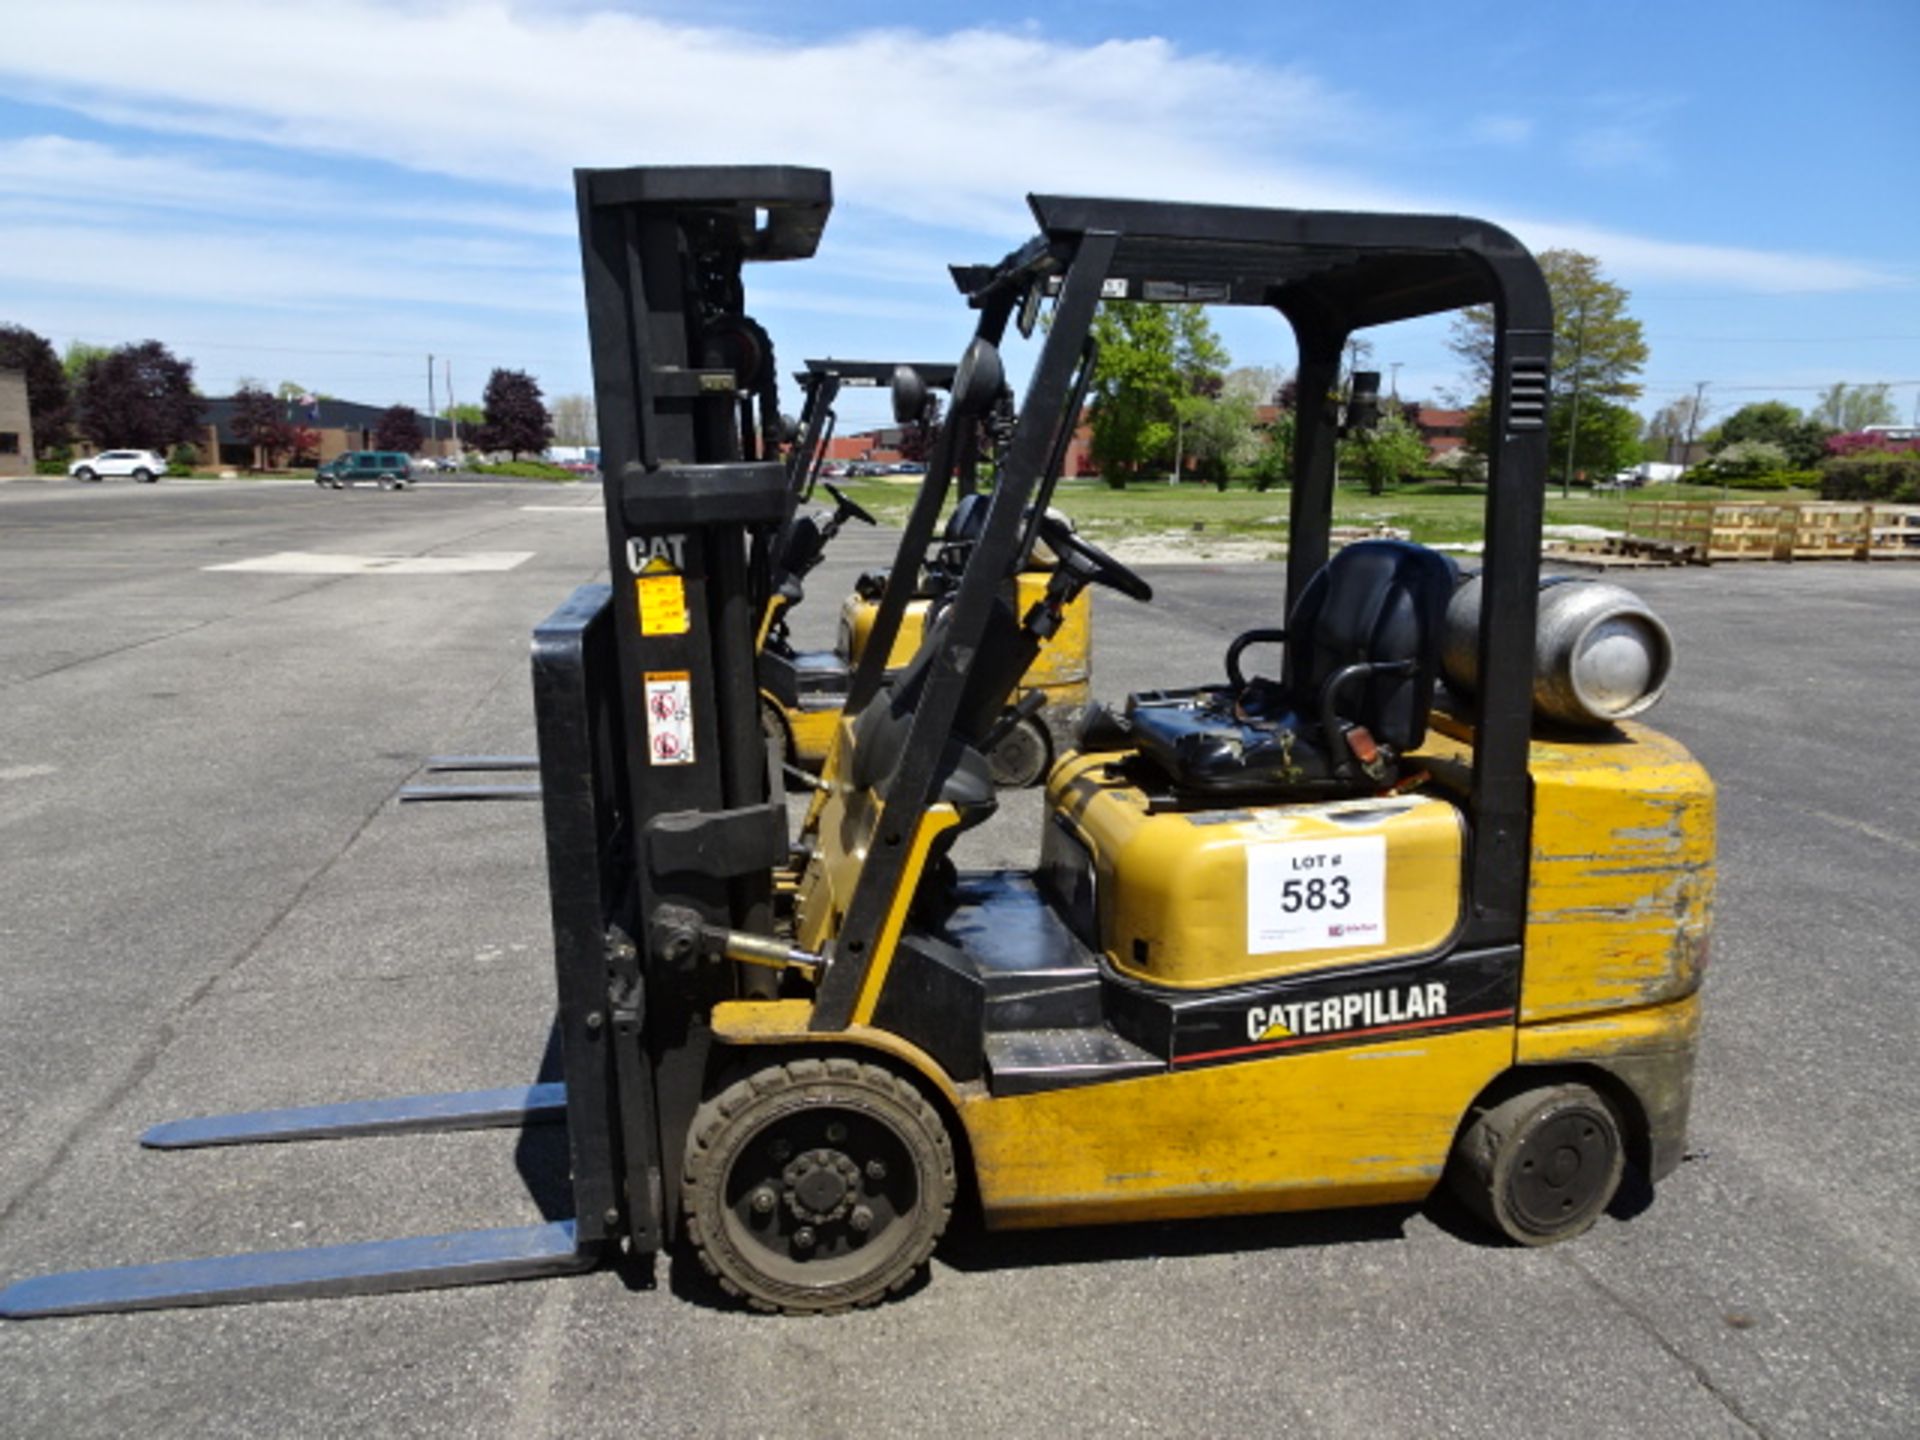 Caterpillar LPG 5000-Lb Forklift w/ Triple Mast, Side Shift, Solid Wide Track Tires, 10569 Hours, - Image 3 of 4